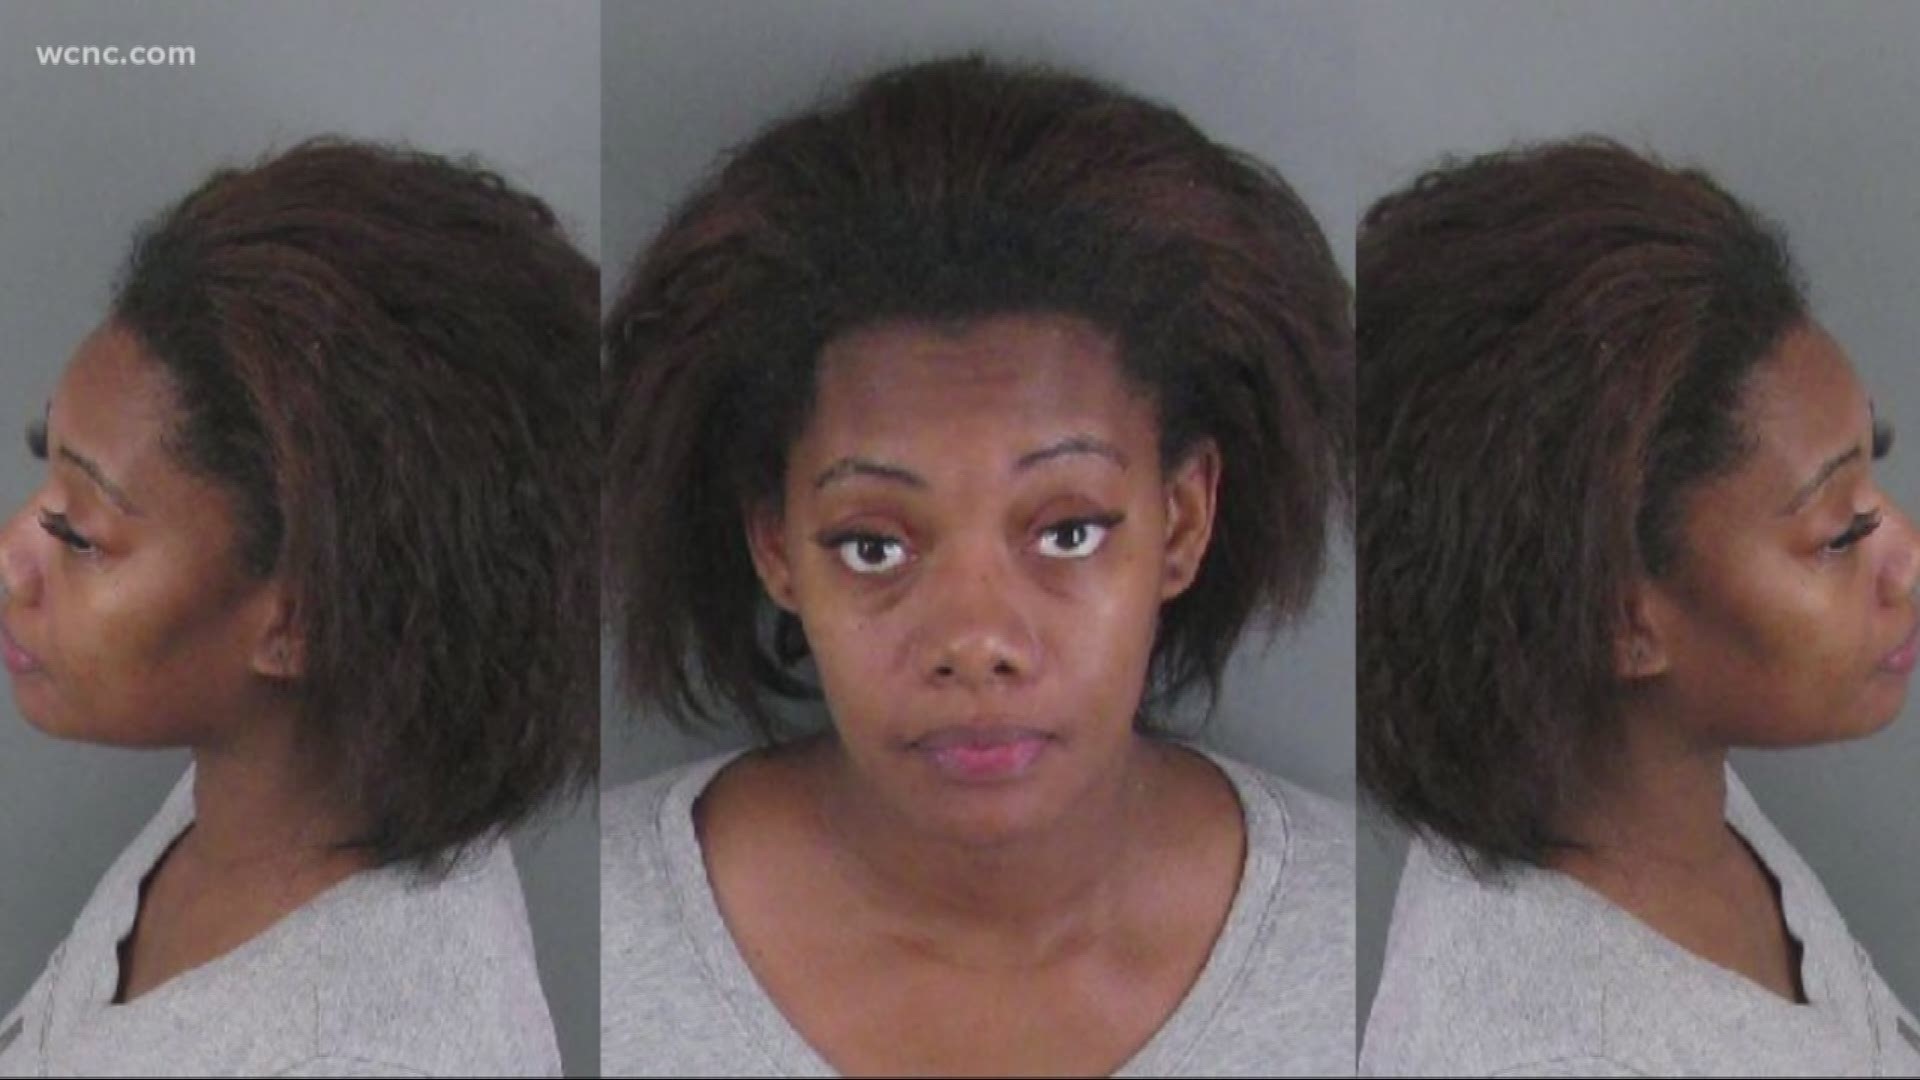 A Gastonia woman was arrested after police said she left her three young children home alone drinking vodka.